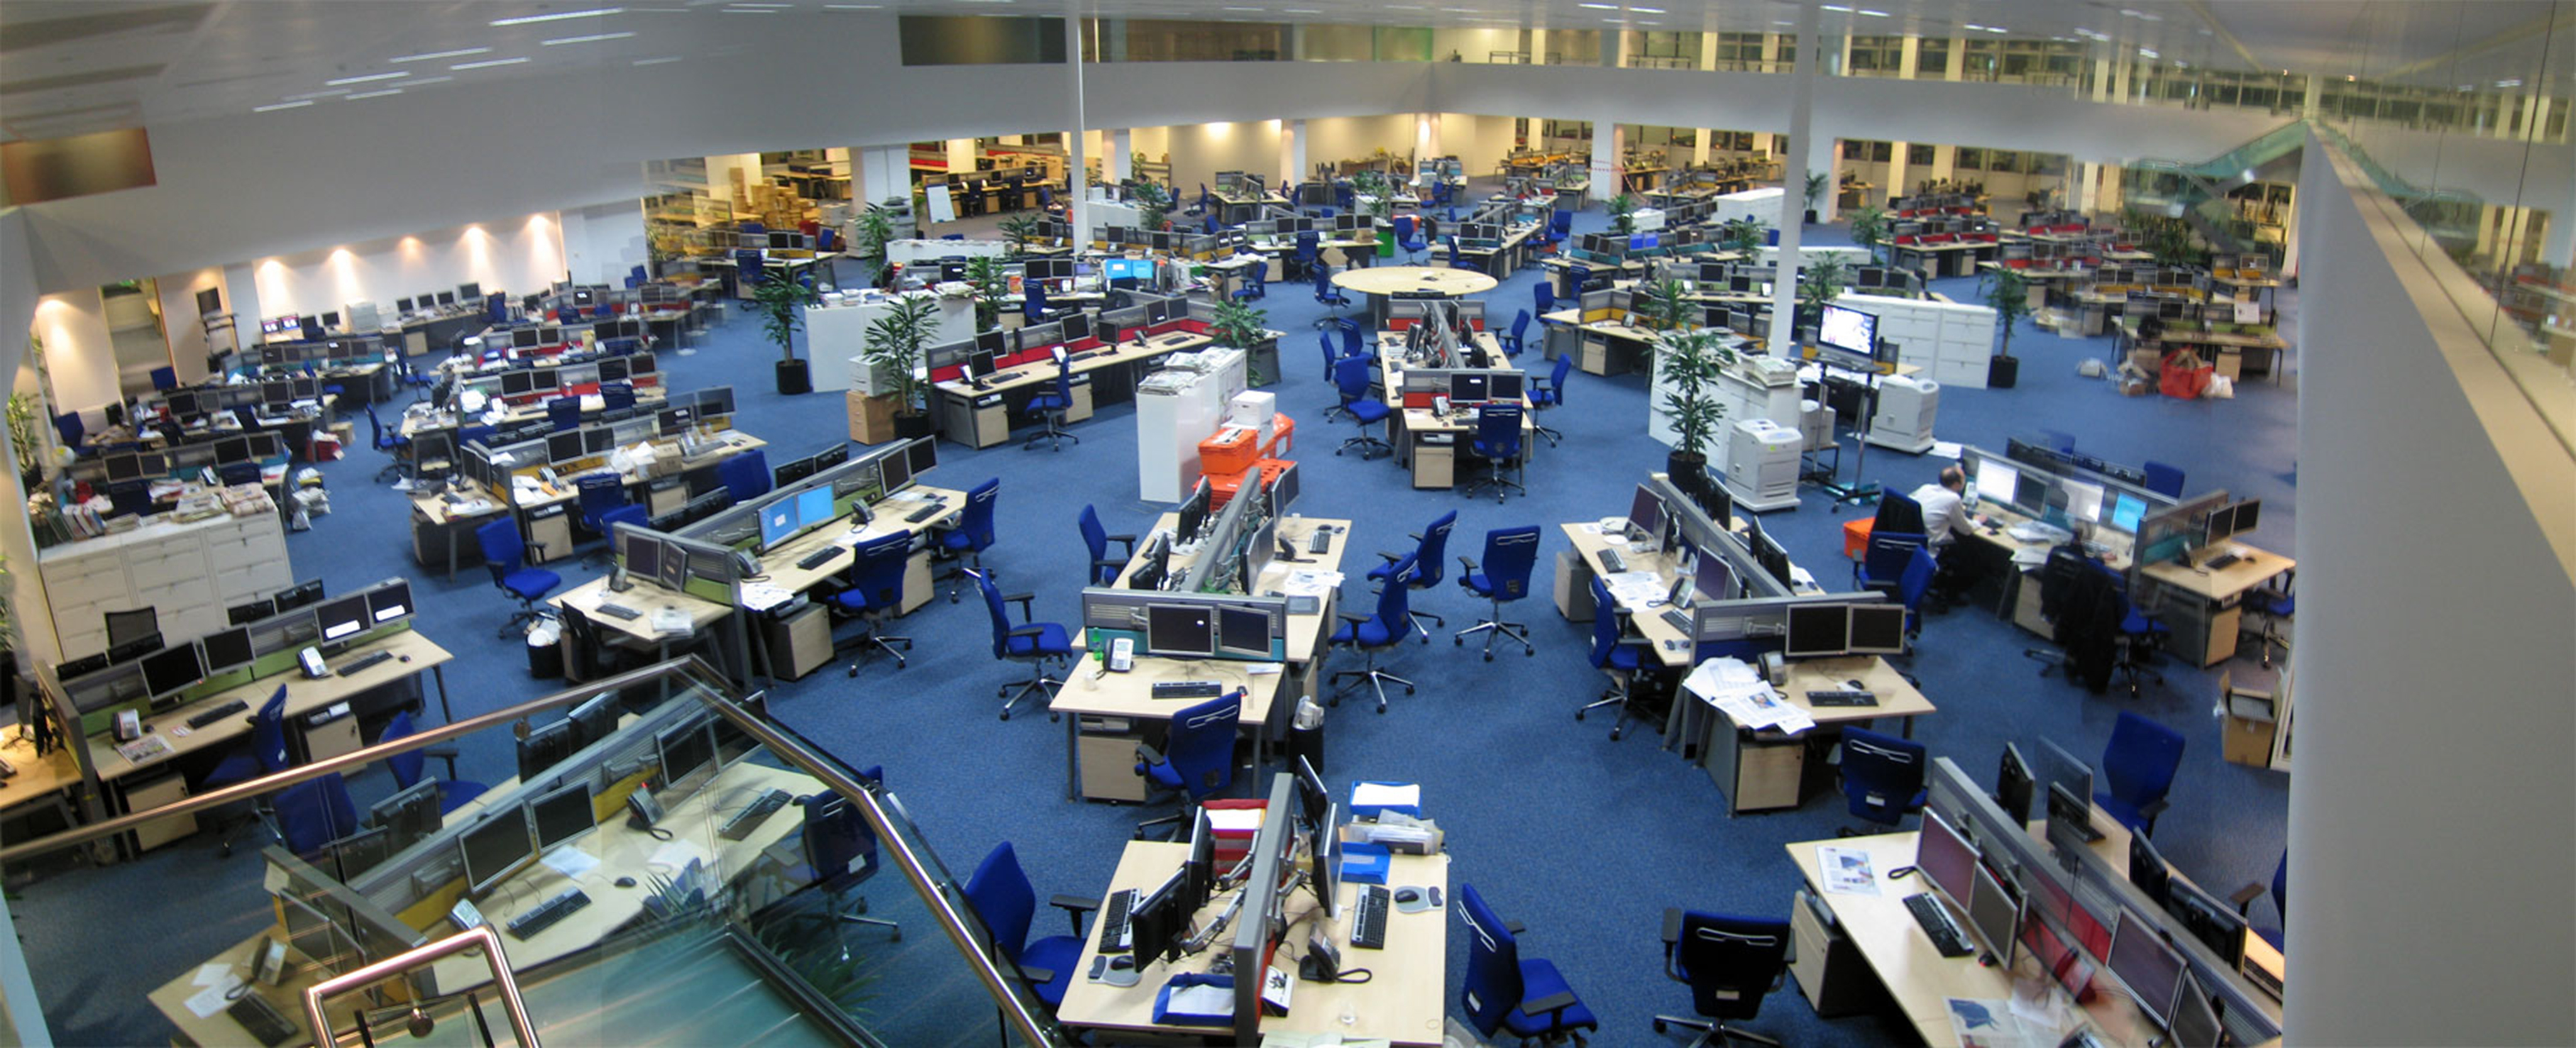 This photo shows a large open news room with enough space to seat about 200 employees.